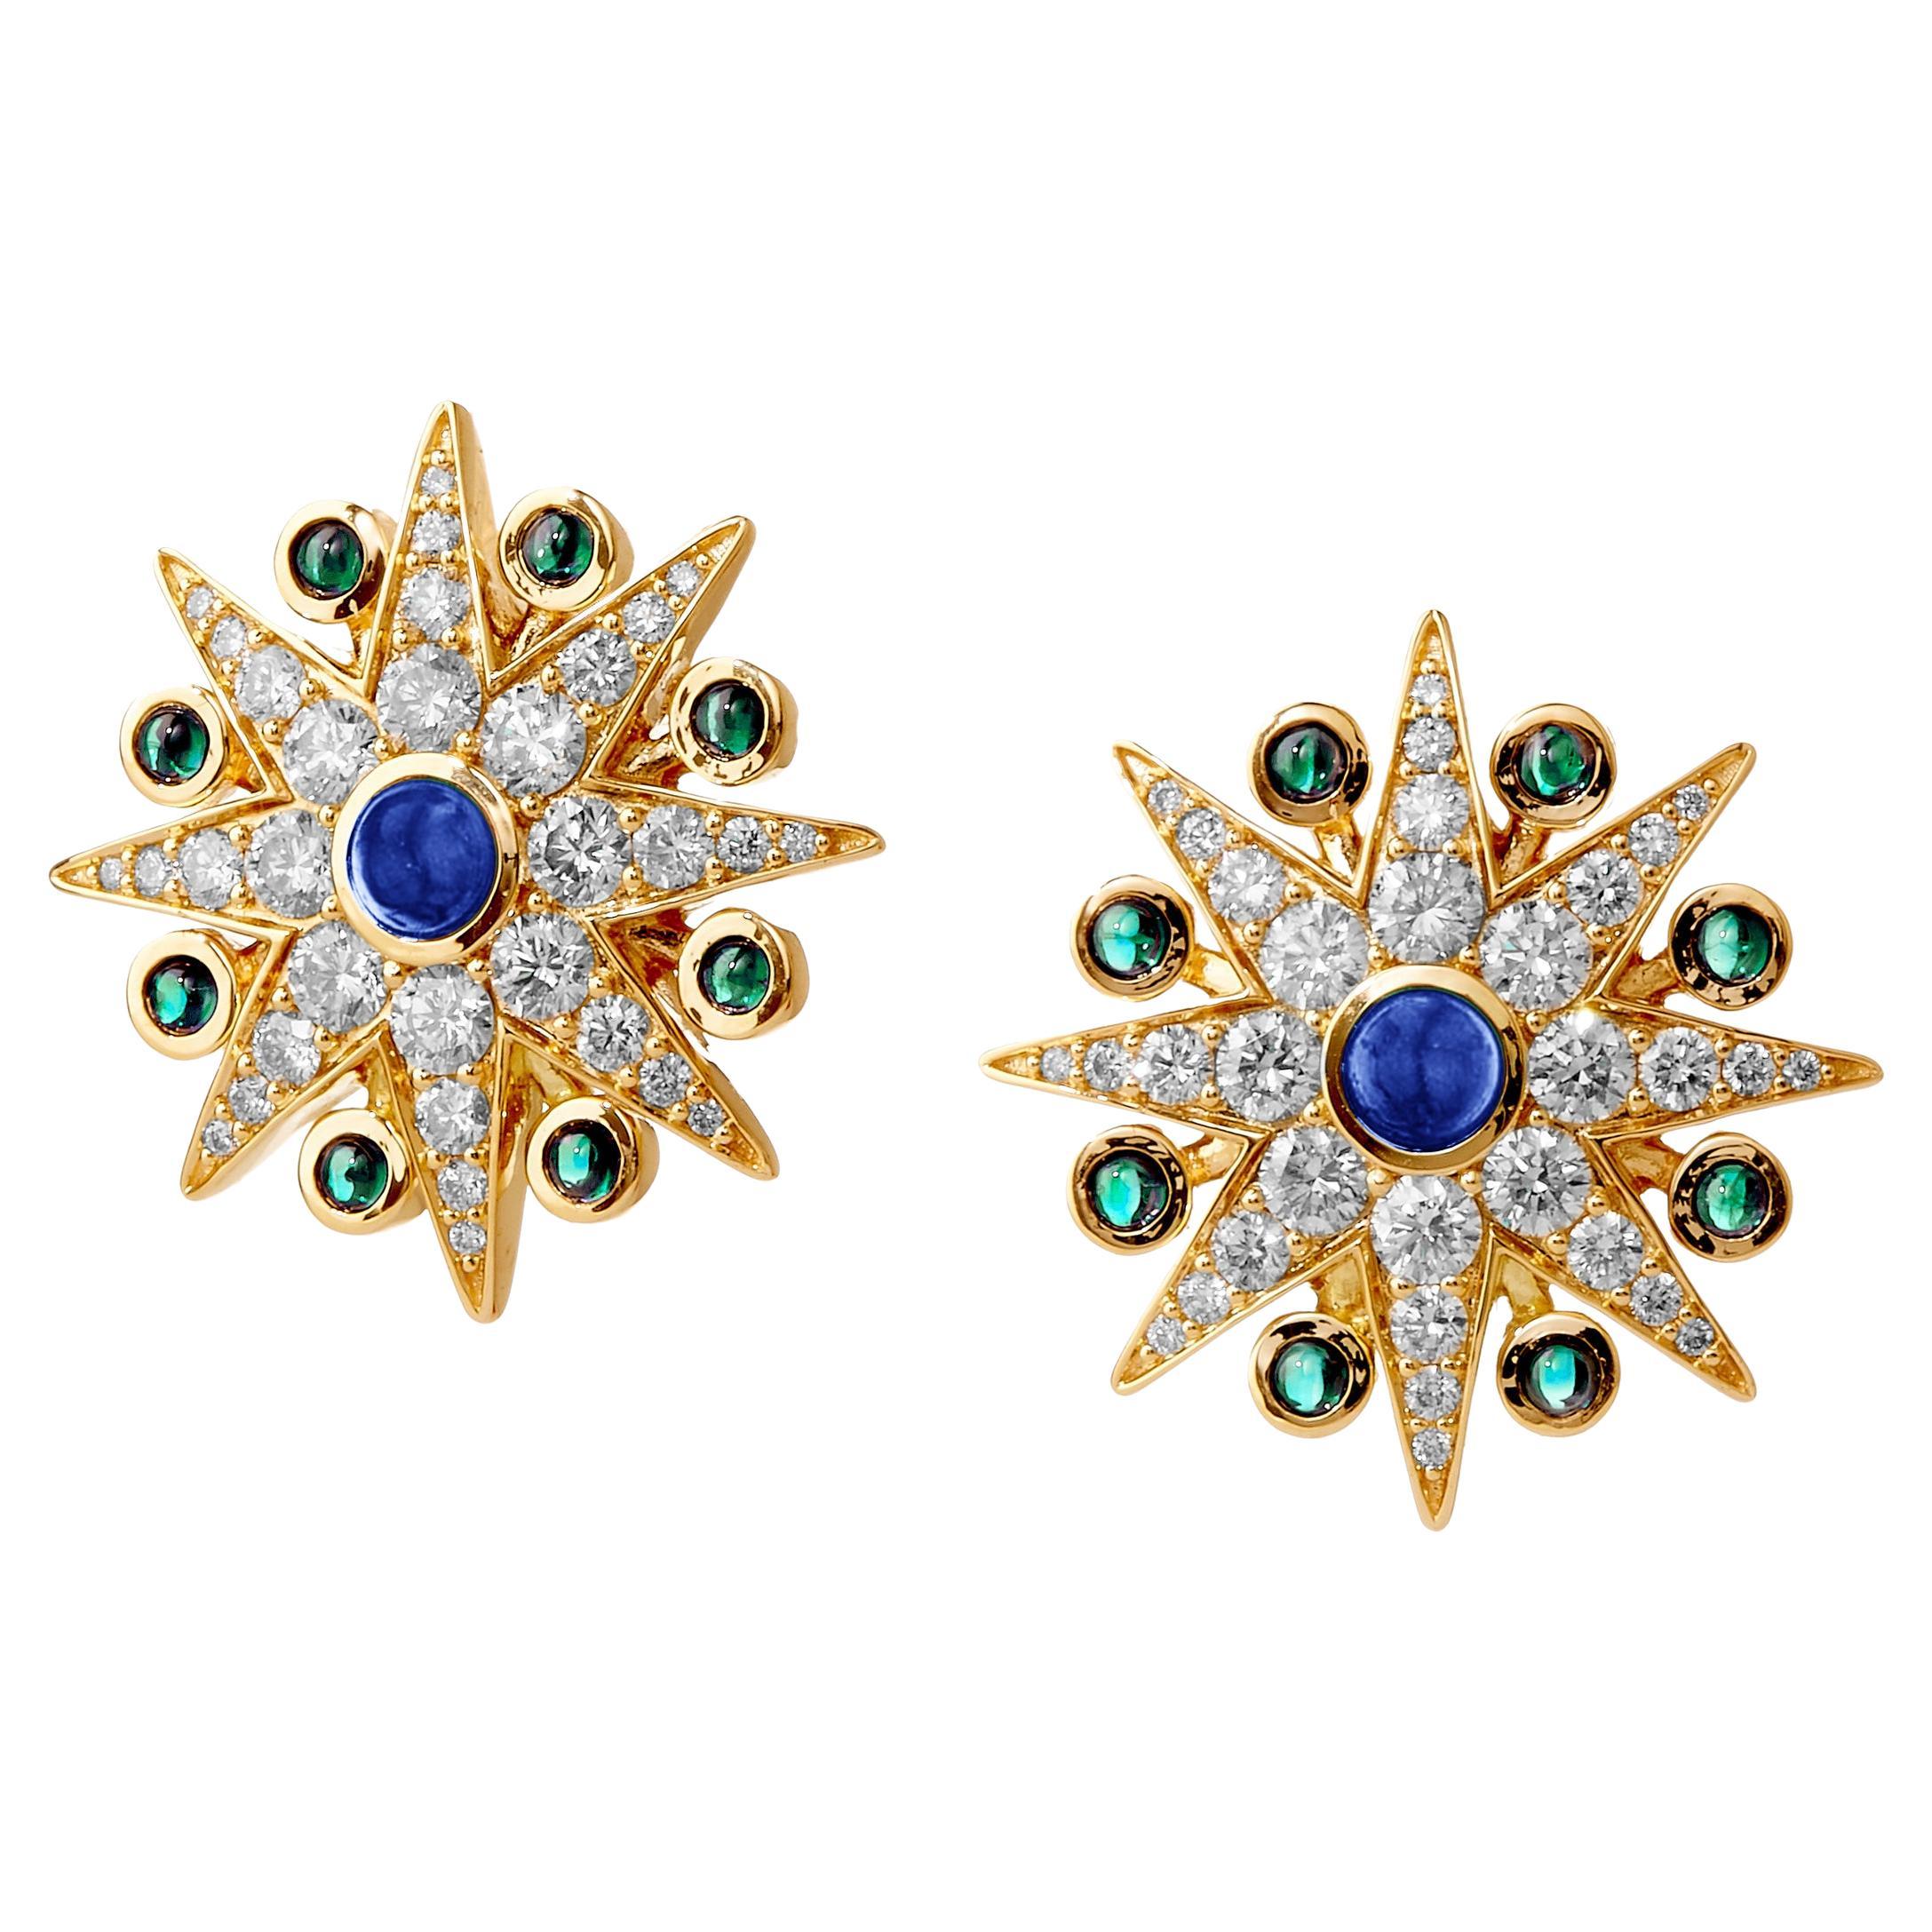 Syna Cosmic Earrings with Blue Sapphires, Emeralds and Diamonds